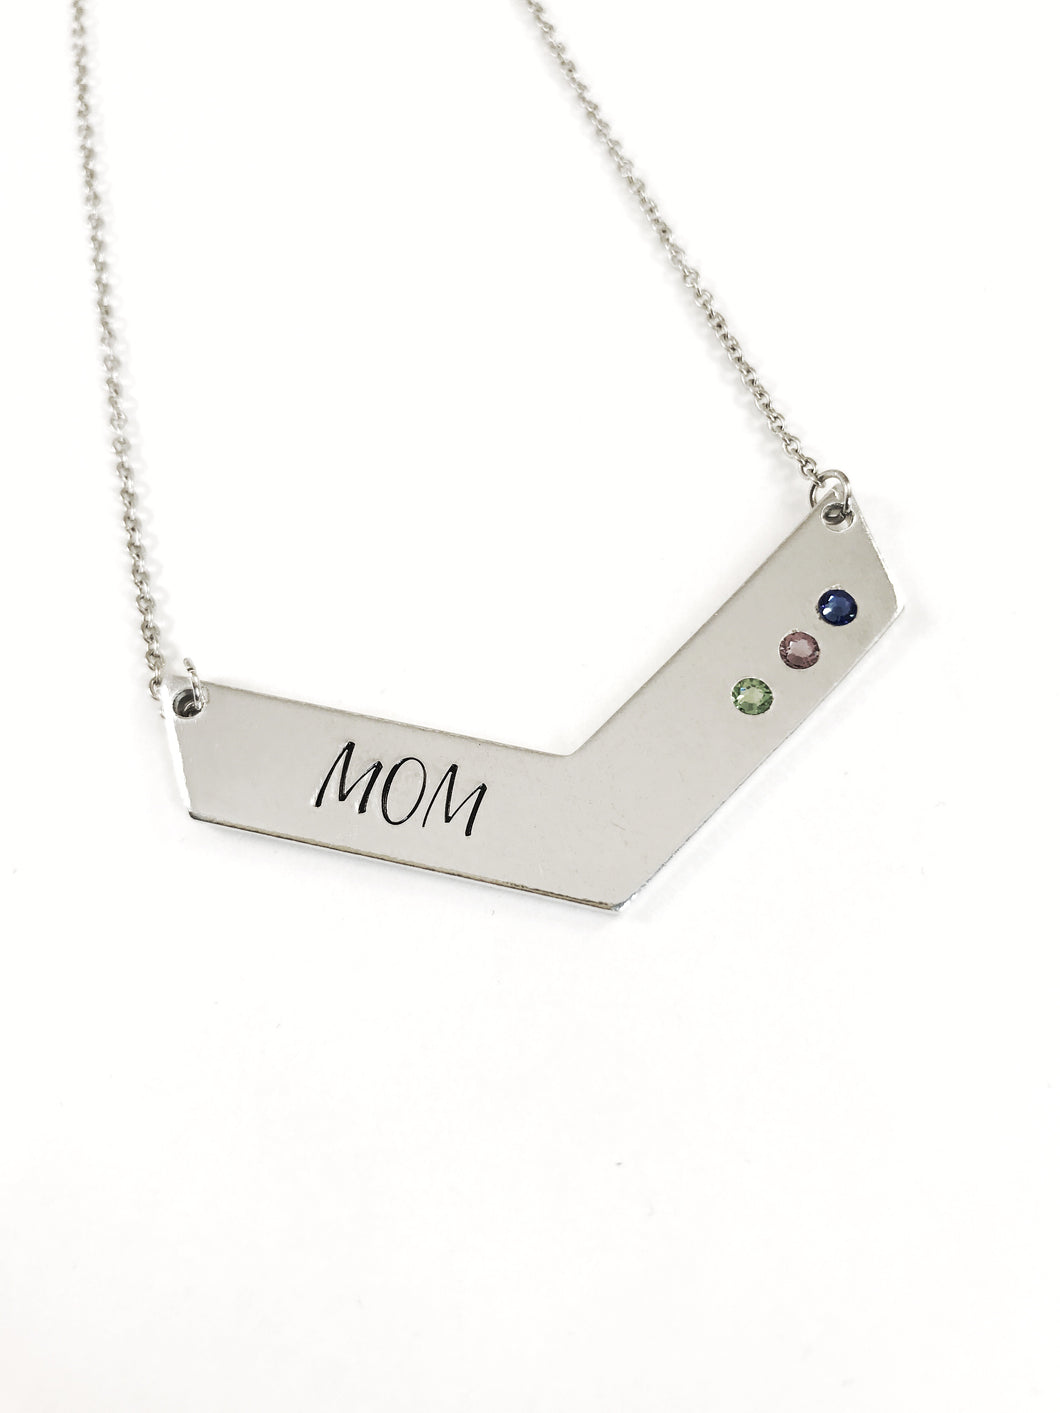 Chevron bar necklace with birthstones for mom